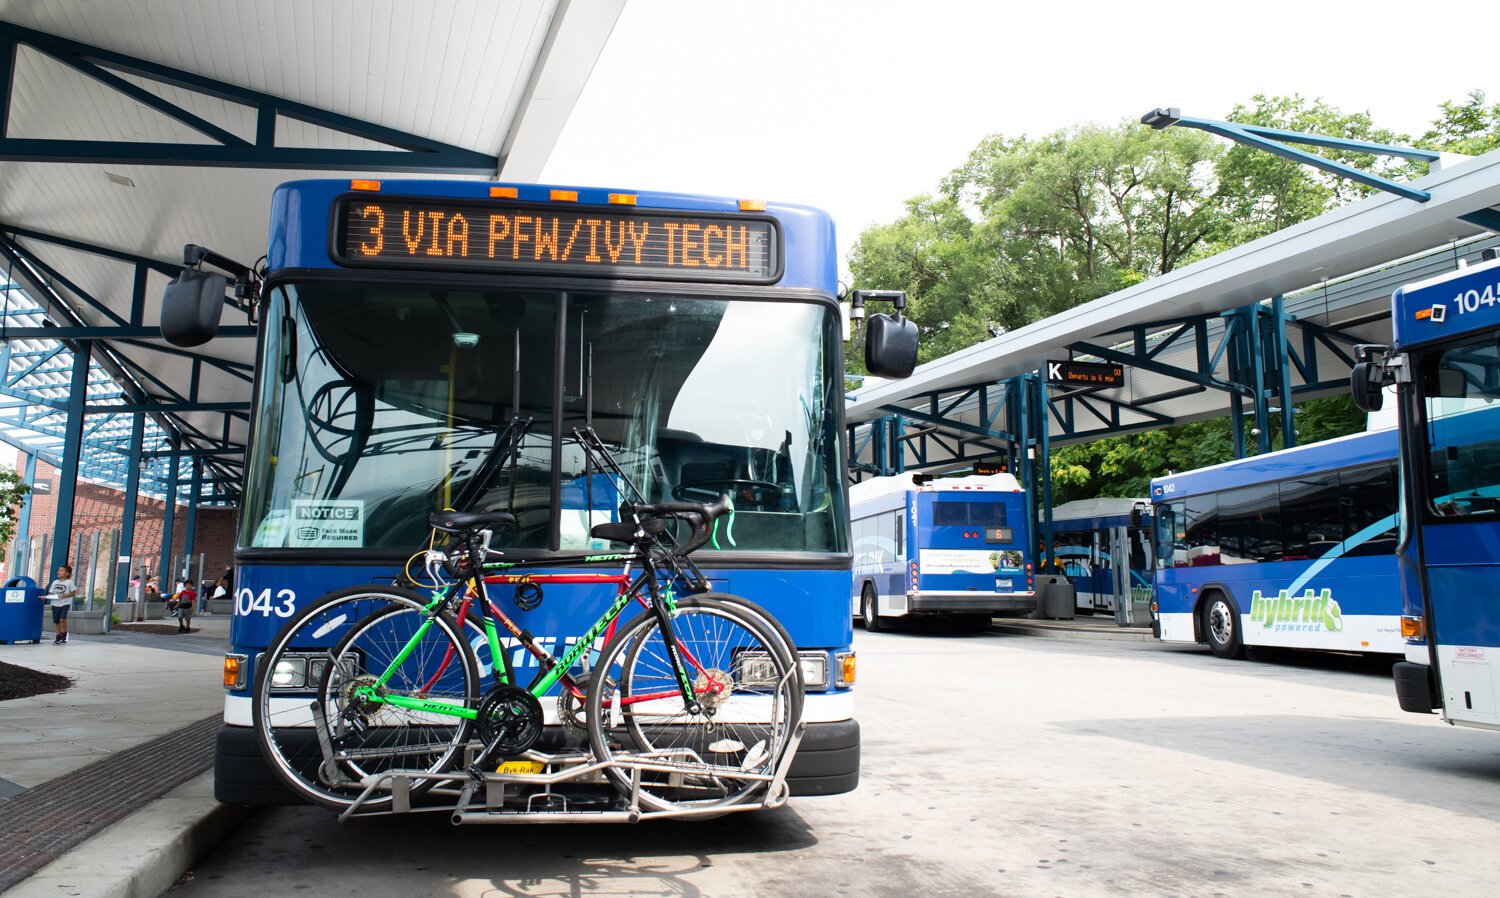 Bike racks help cyclists make use of Citilink buses to get from trail to trail.